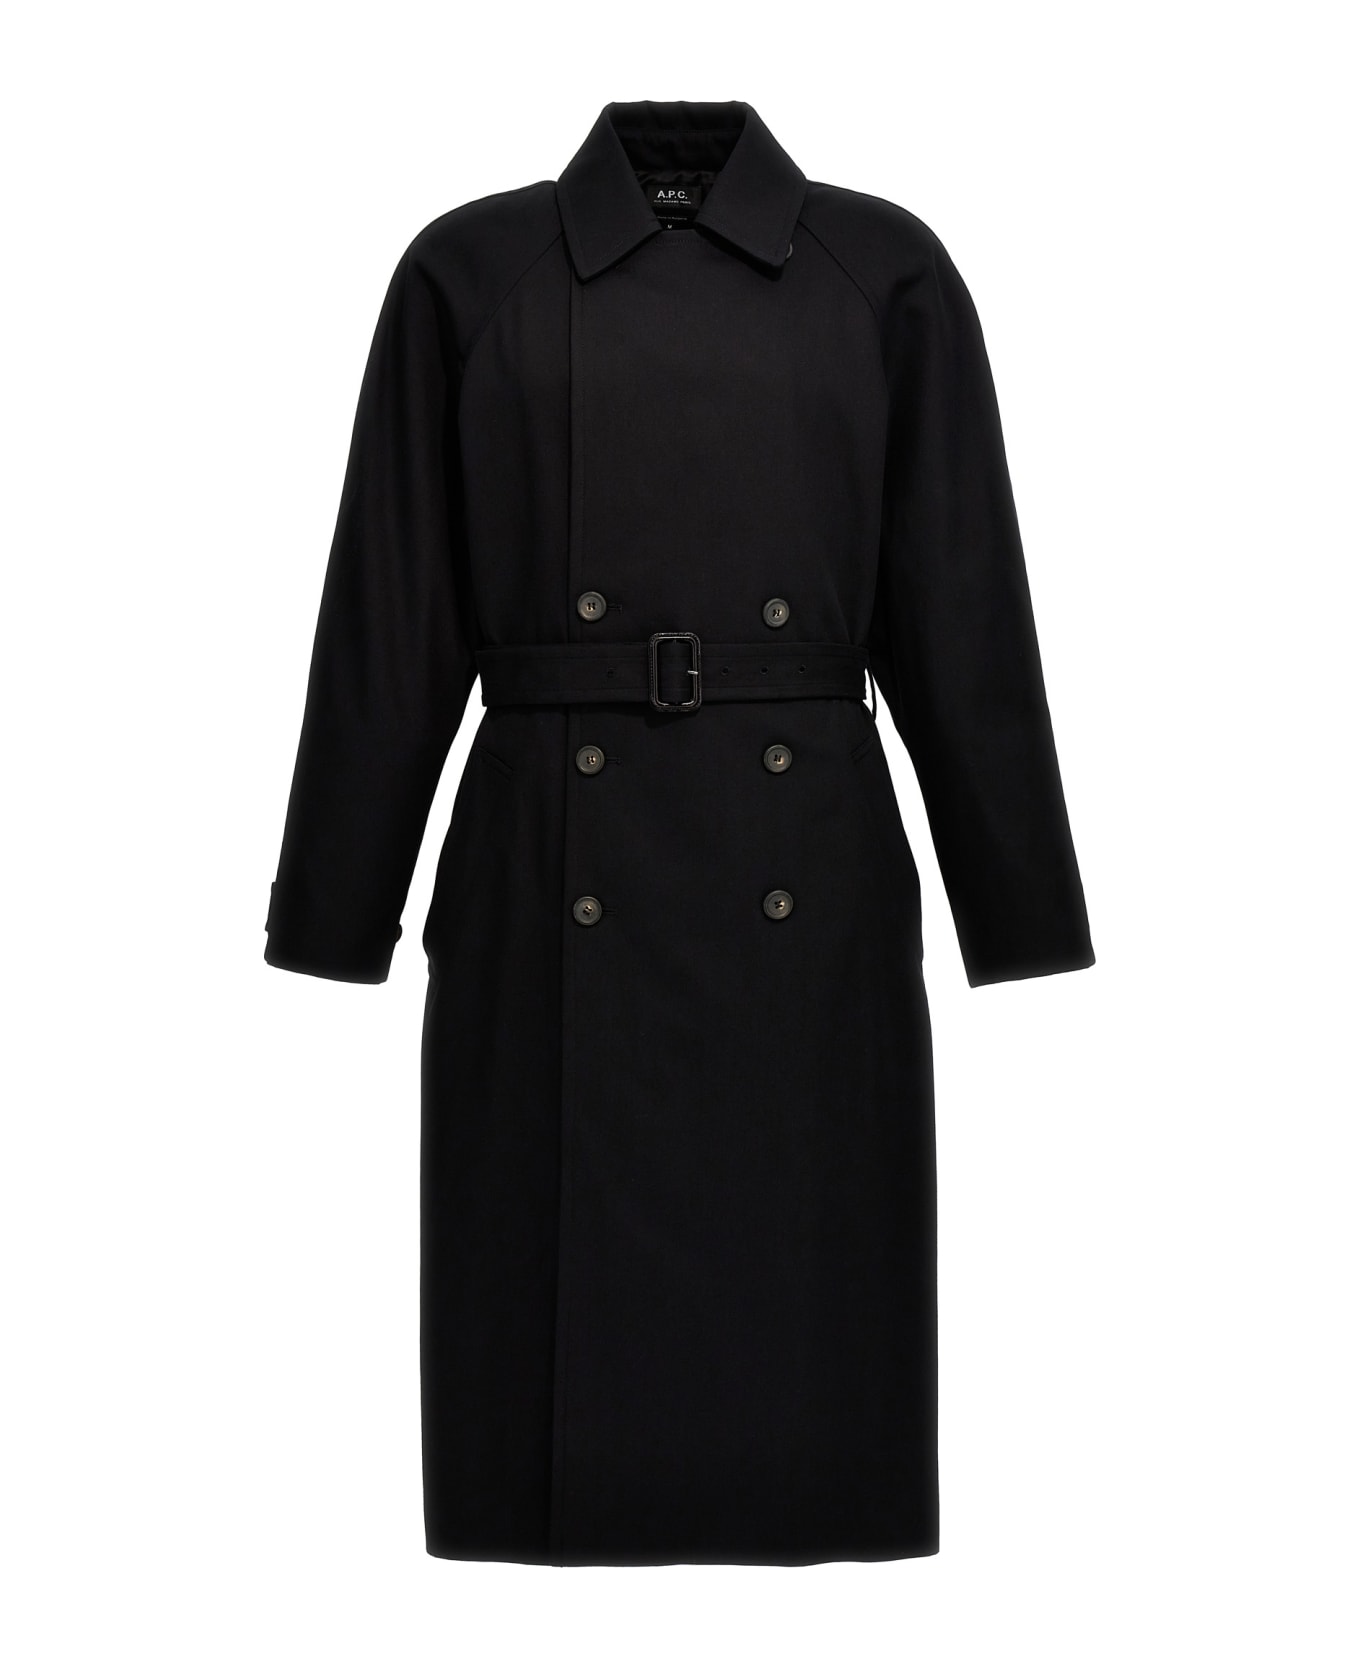 A.P.C. Double-breasted Trench Coat - Black レインコート